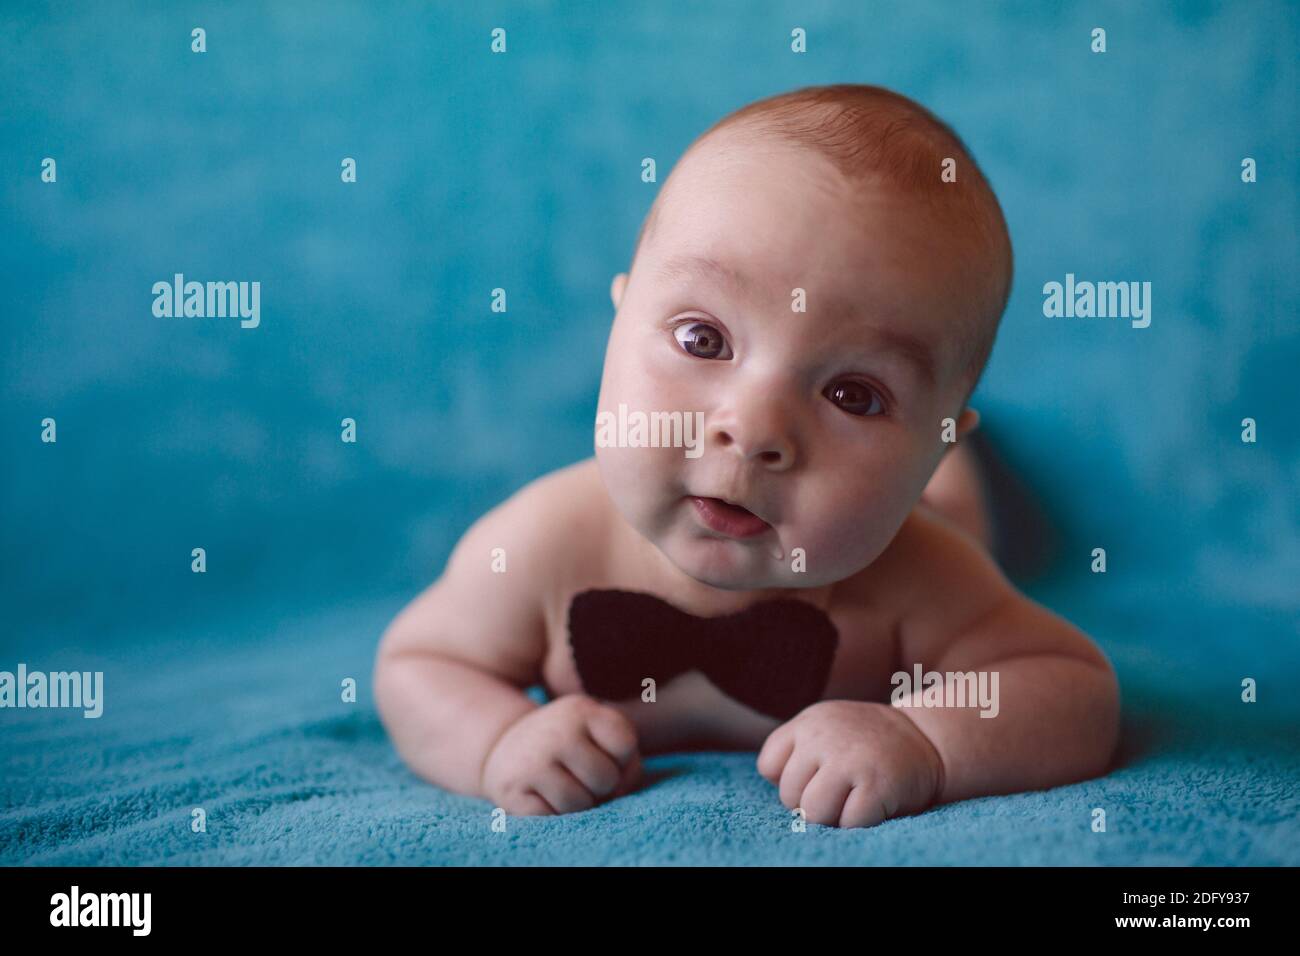 Cute 3 month baby boy on a blue blanket Stock Photo